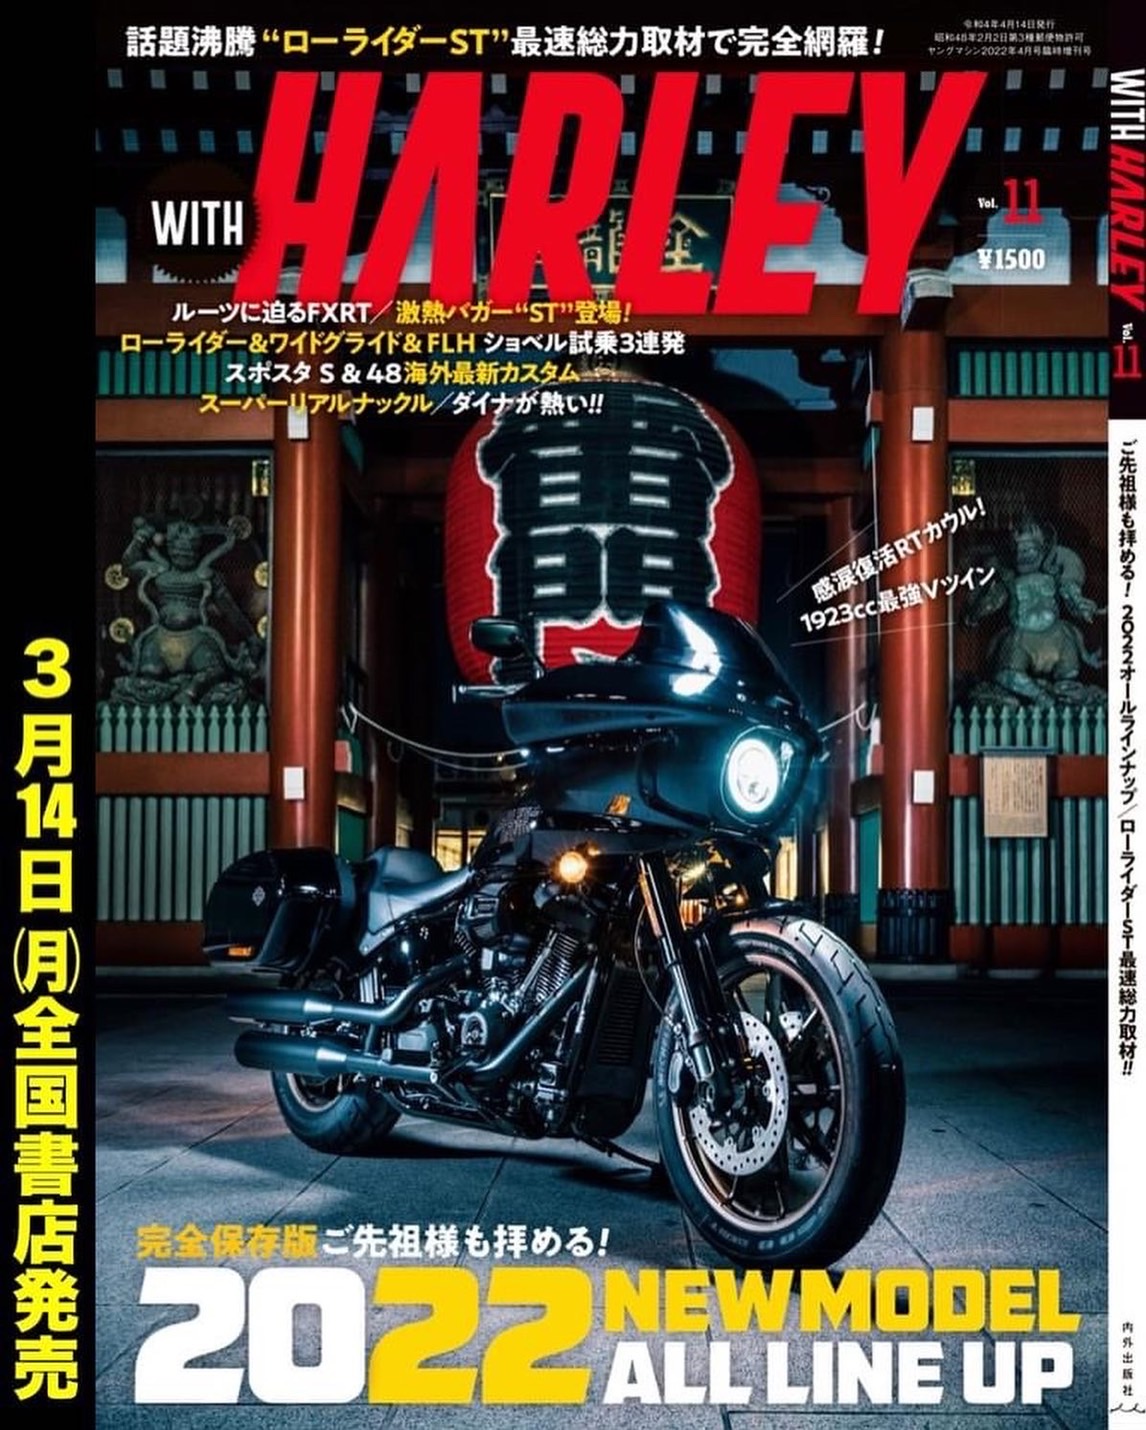 WITH HARLEY Vol11 掲載のご案内